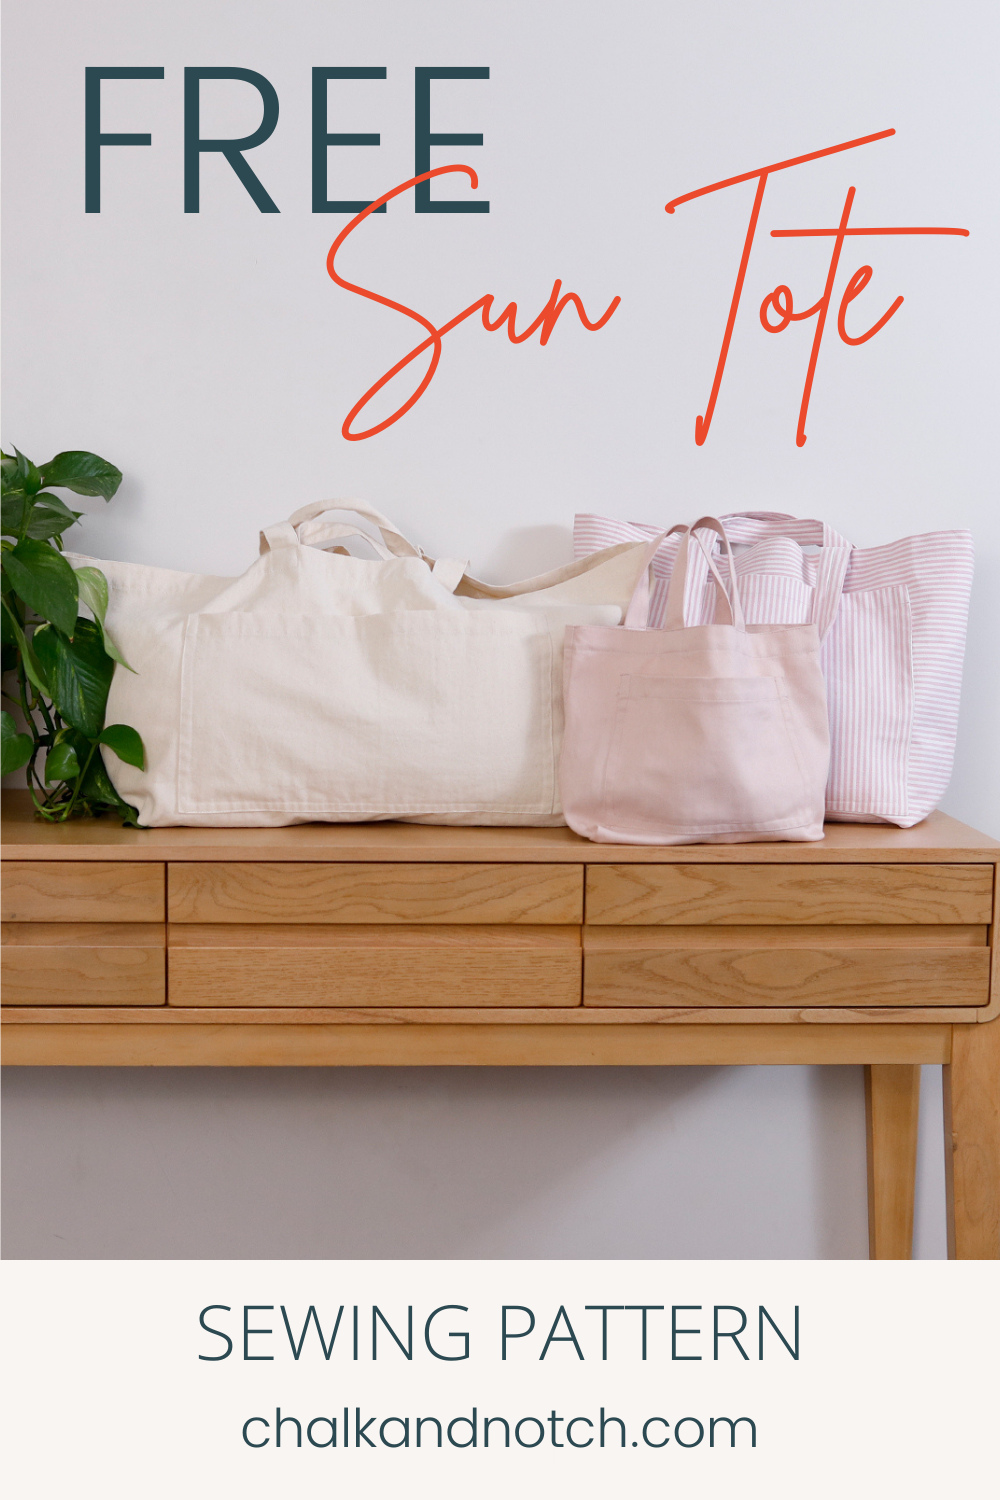 Get the Free Sun Tote Sewing Pattern - A Tote in three sizes: Large, Medium, and Small. Click for details.